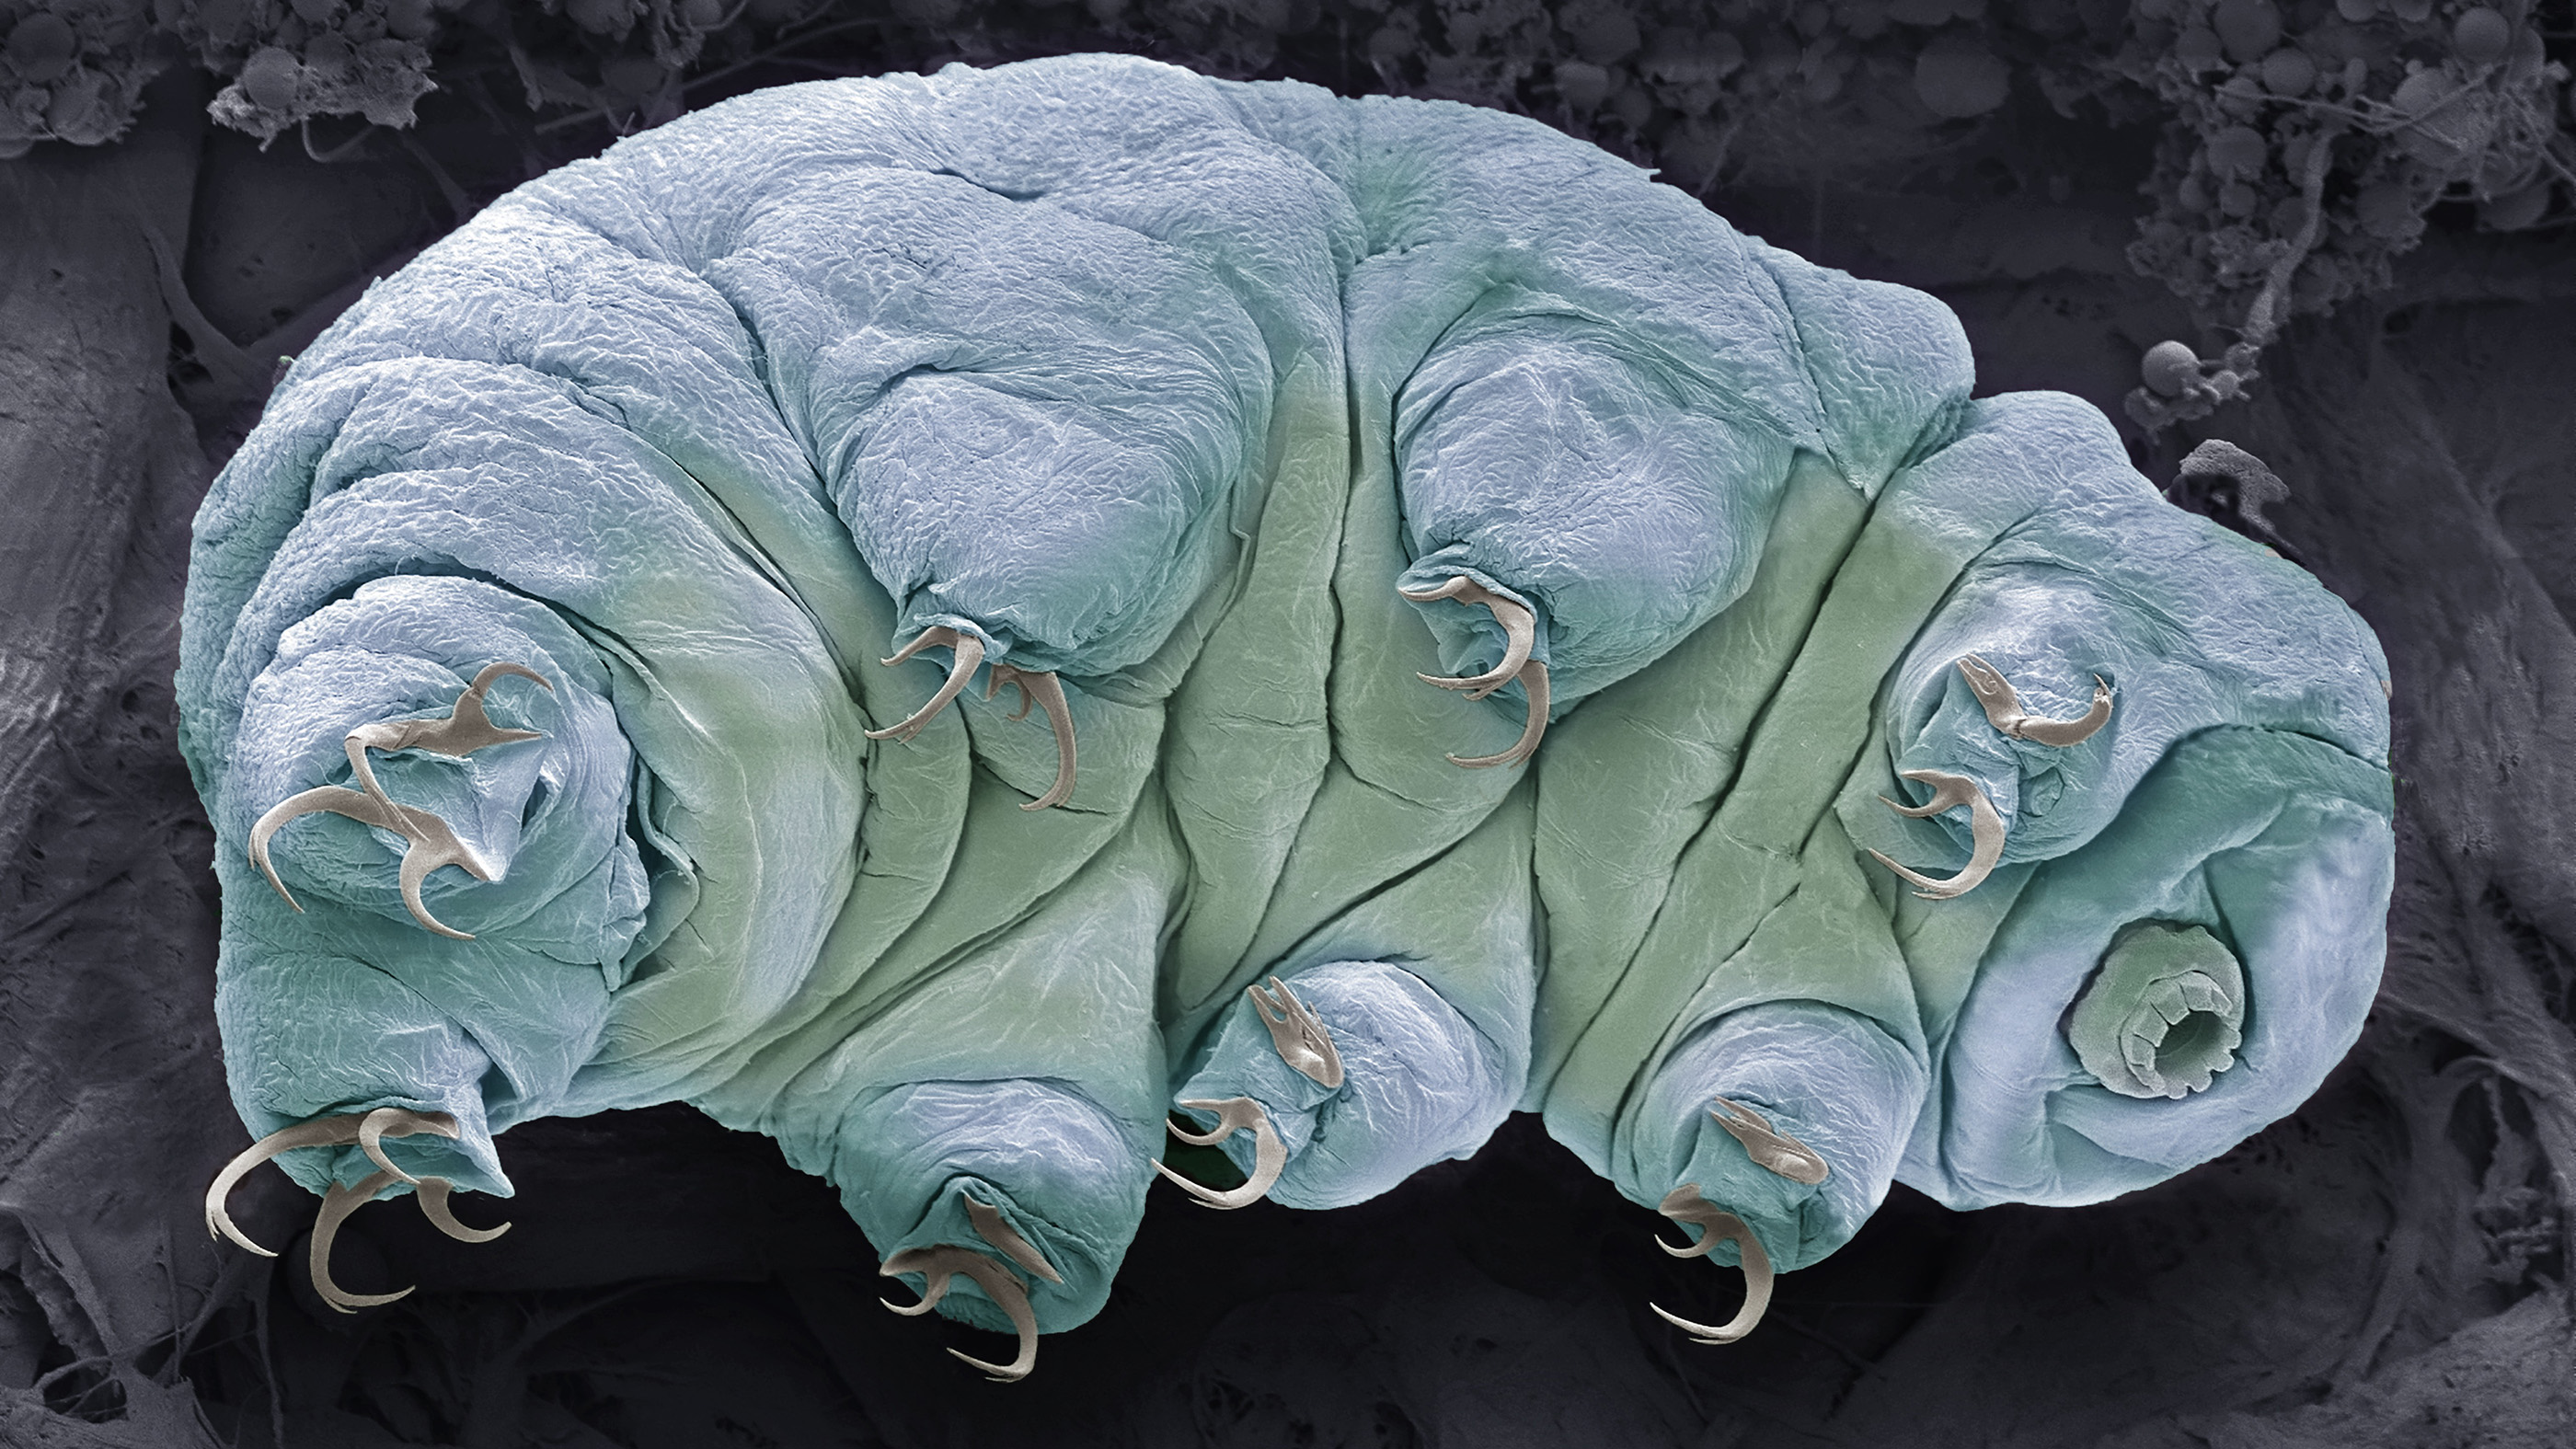 Frozen Tardigrade Becomes First 'Quantum Entangled' Animal In History,  Researchers Claim | Live Science